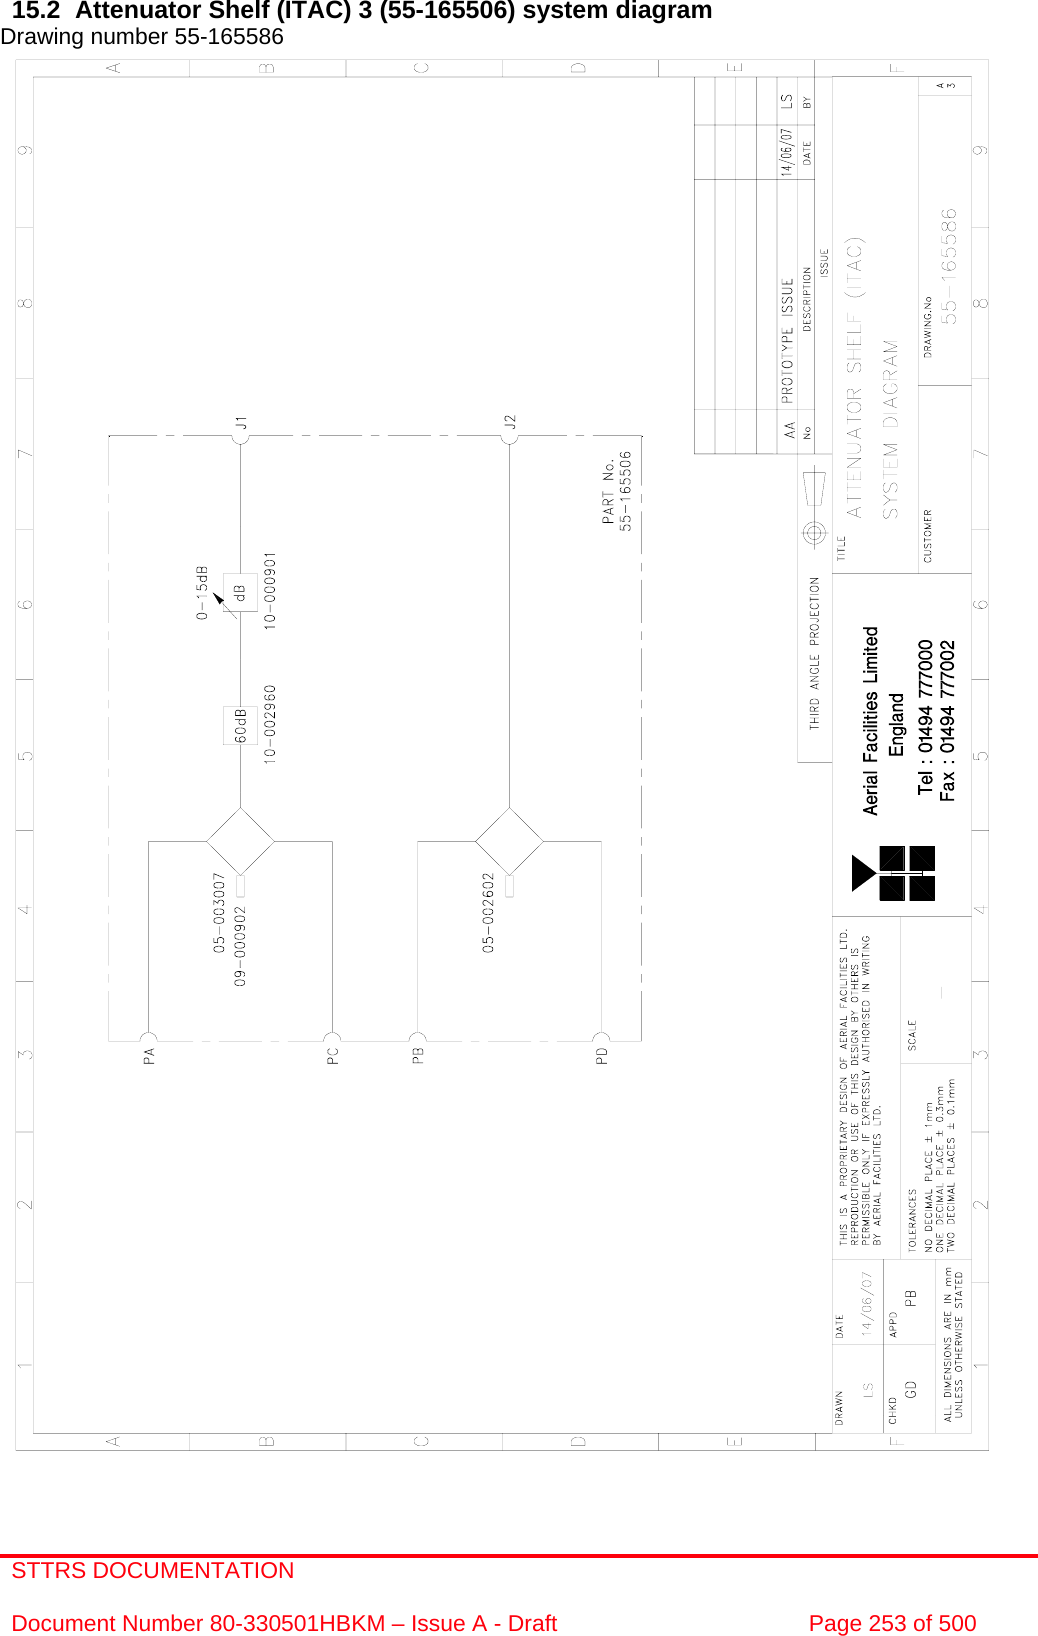 STTRS DOCUMENTATION  Document Number 80-330501HBKM – Issue A - Draft  Page 253 of 500   15.2  Attenuator Shelf (ITAC) 3 (55-165506) system diagram  Drawing number 55-165586                                                       